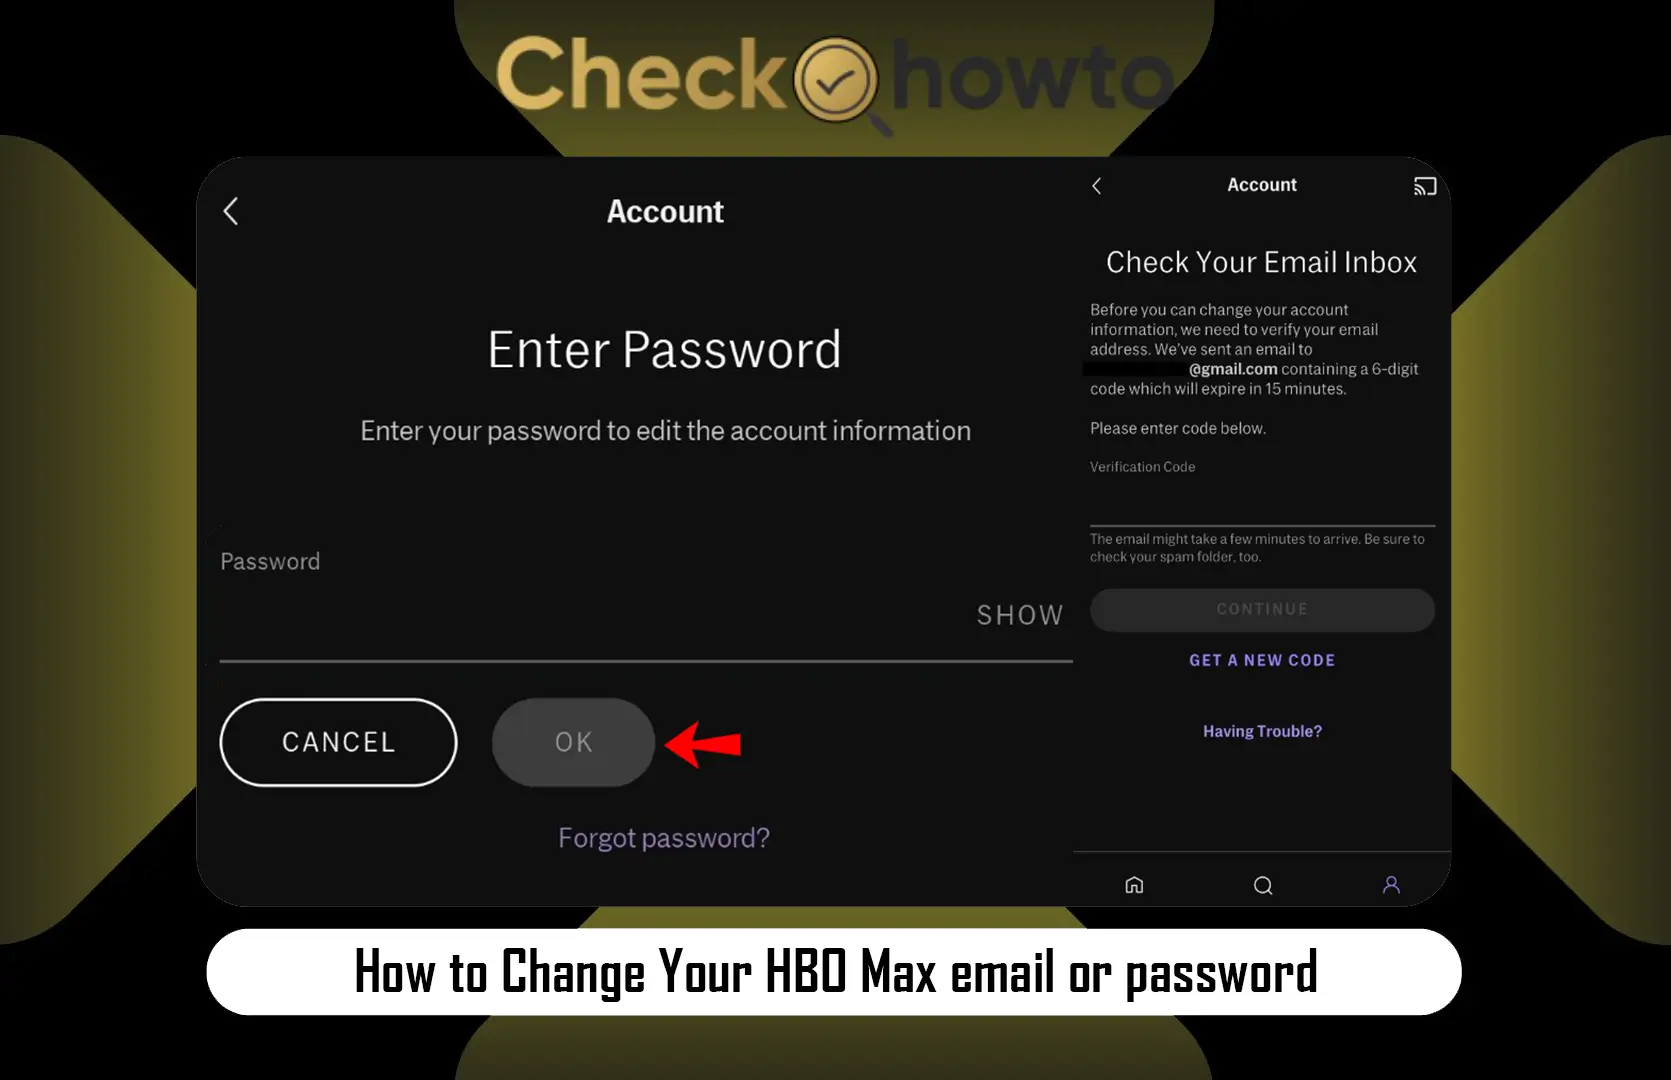 How to Change Your HBO Max email or password